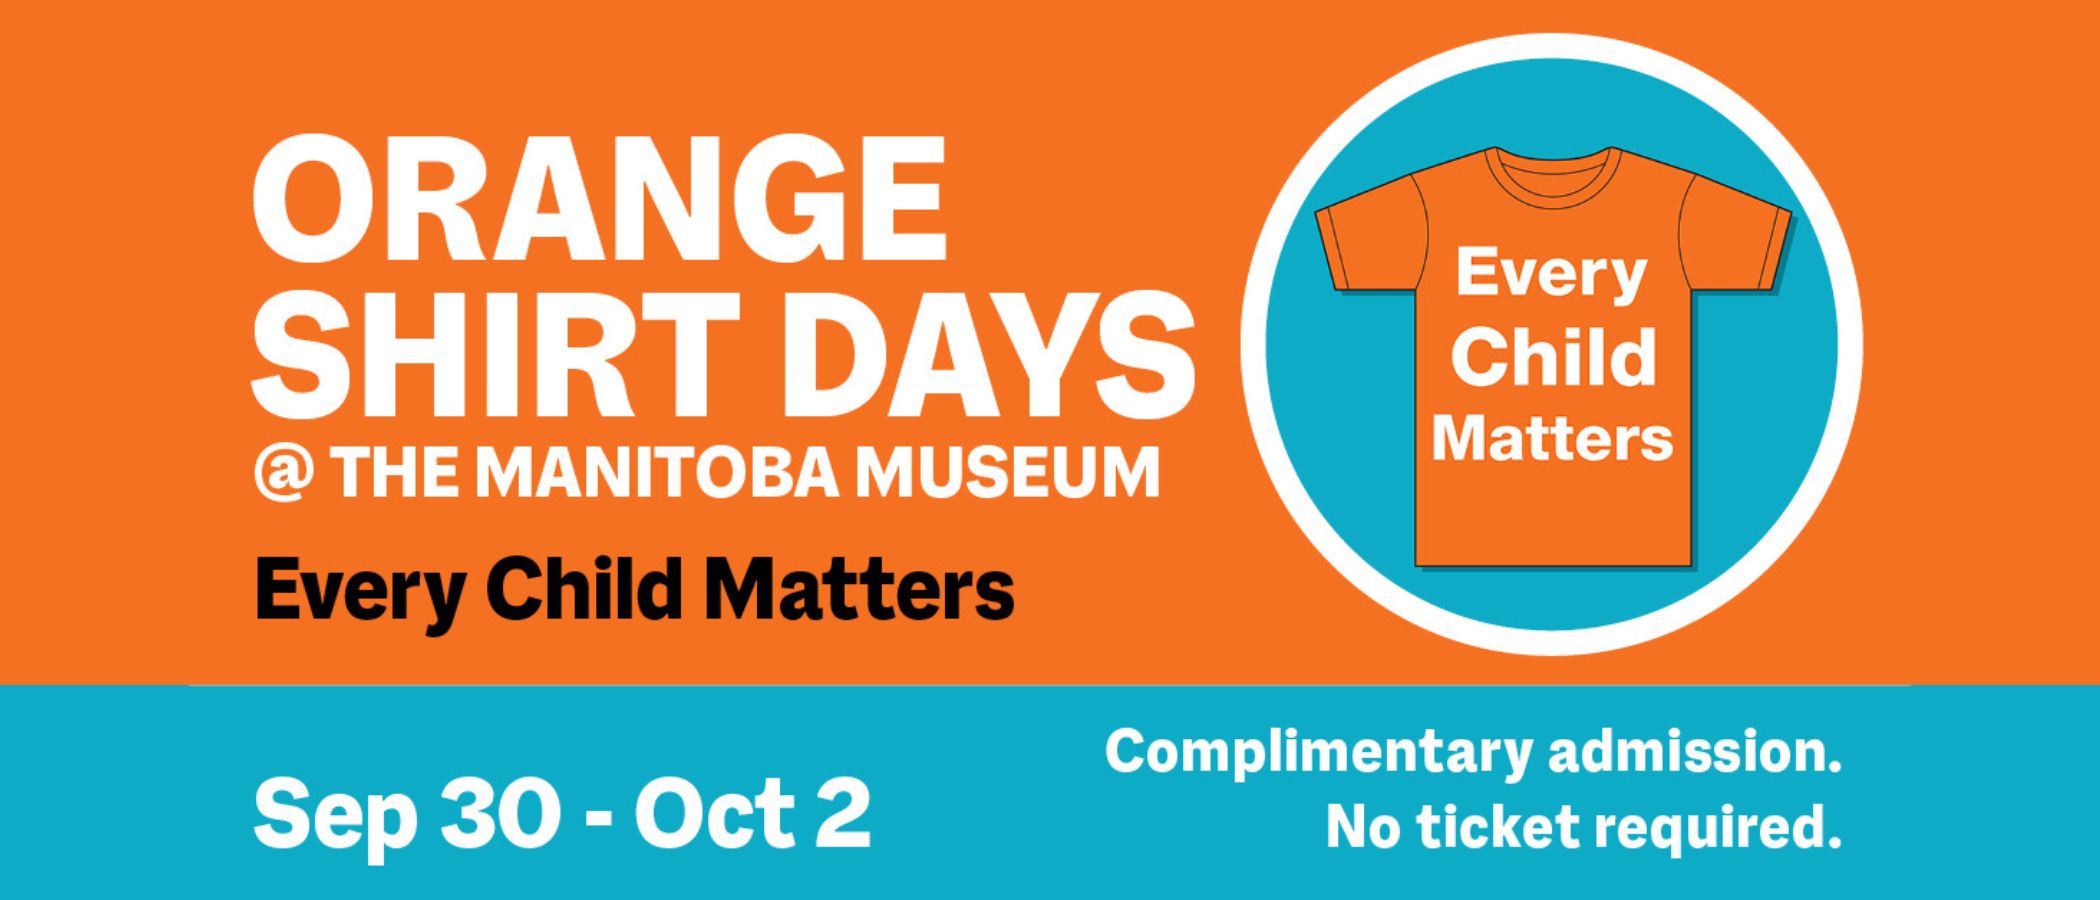 Word graphic. An orange t-shirt with “Every Child Matters”. Text beside it reads “ORANGE SHIRT DAYS @ the Manitoba Museum / Every Child Matters / Sep 30 – Oct 2 / Complimentary admission. No ticket required.”